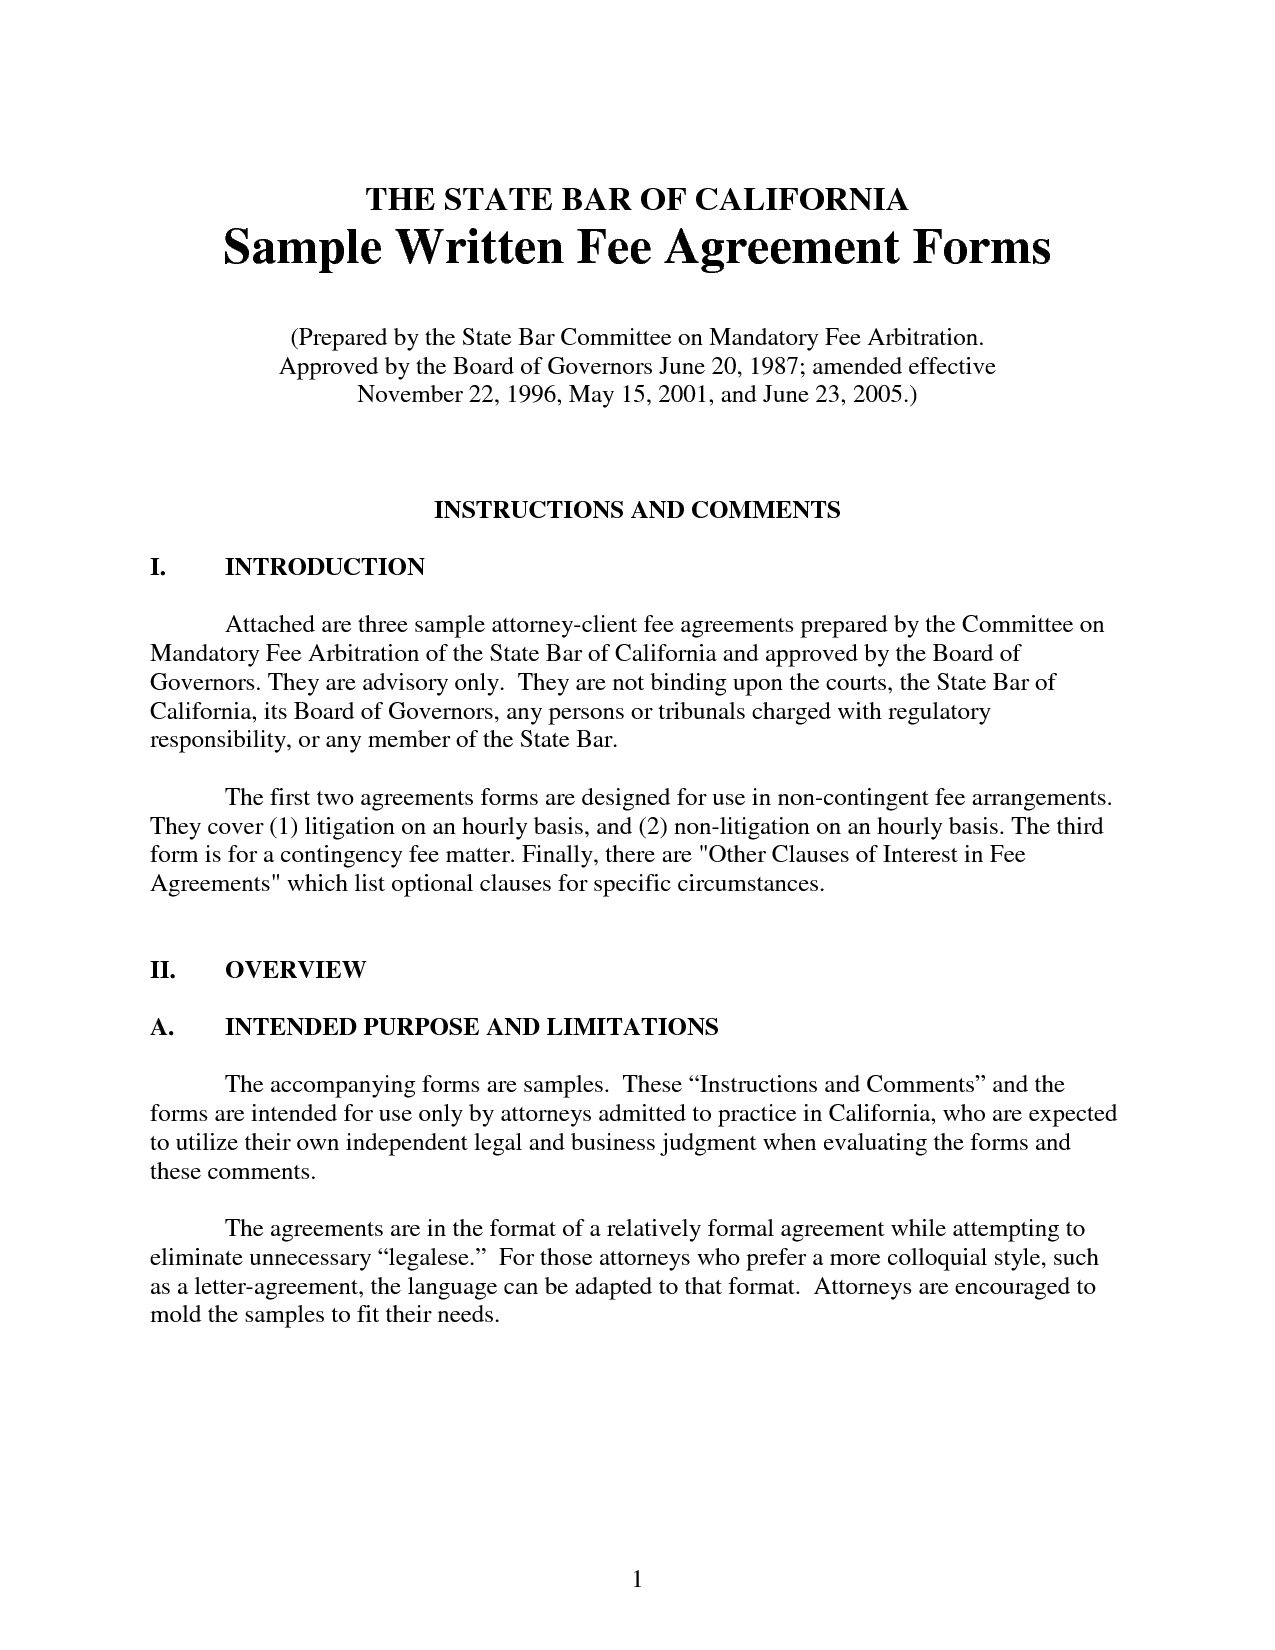 Legal Agreement Formtricky  Legal Agreement Forms  Real State regarding Conditional Fee Agreement Template